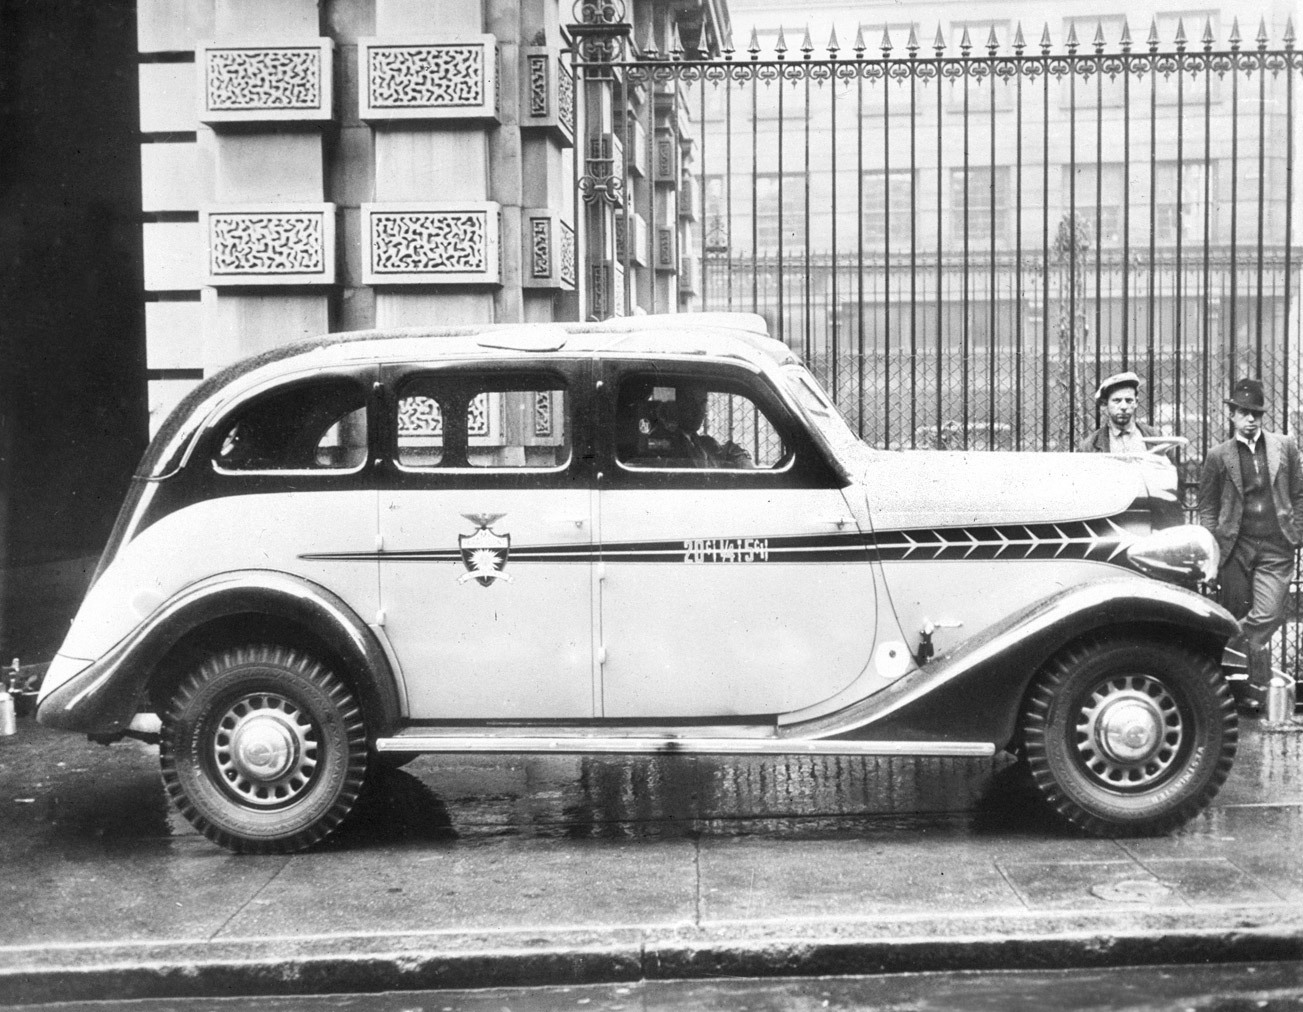 Even taxis go streamlined - 8-December-1934